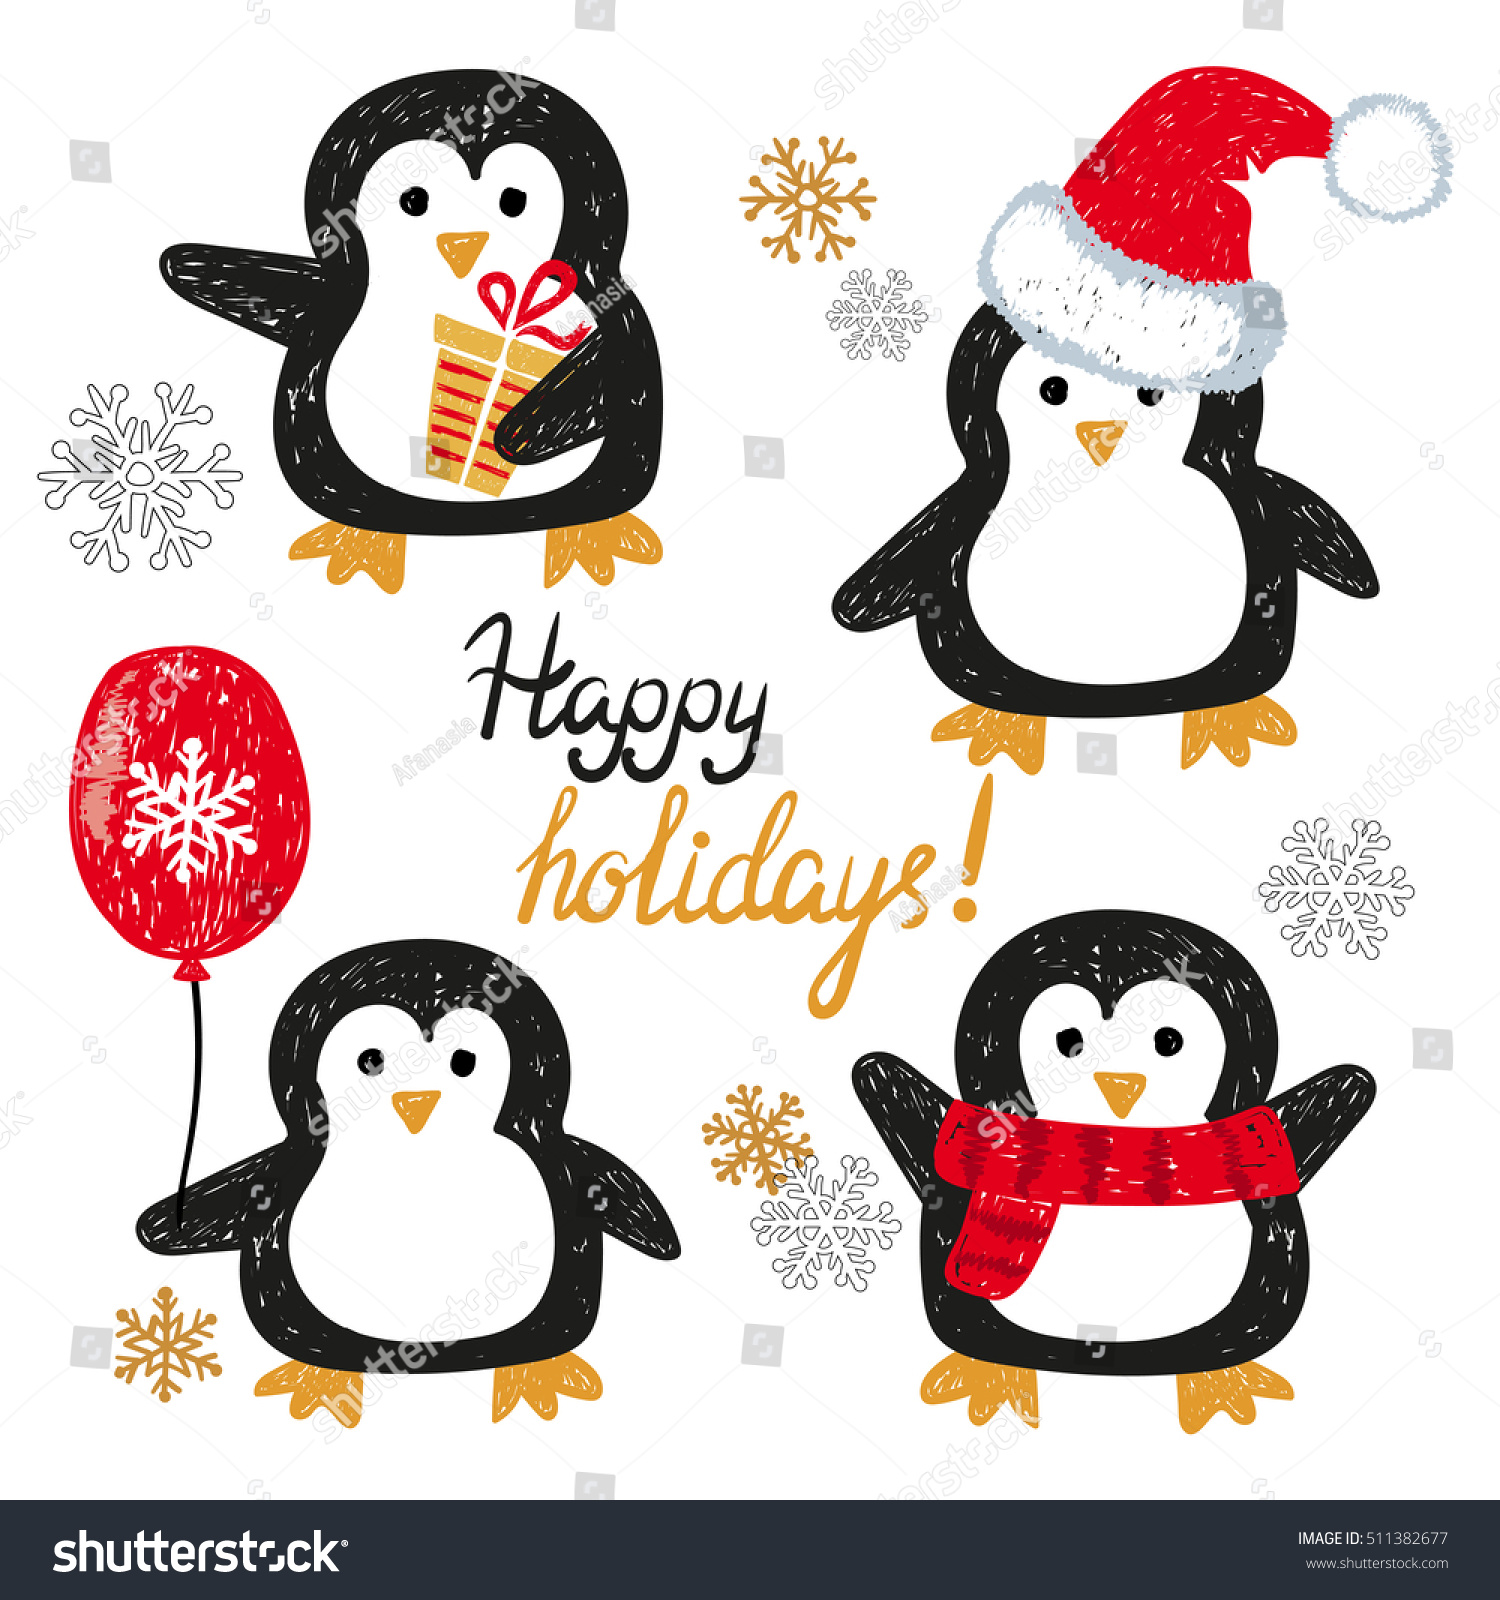 Set of cute doodle penguins Merry Christmas greetings Vector holiday characters